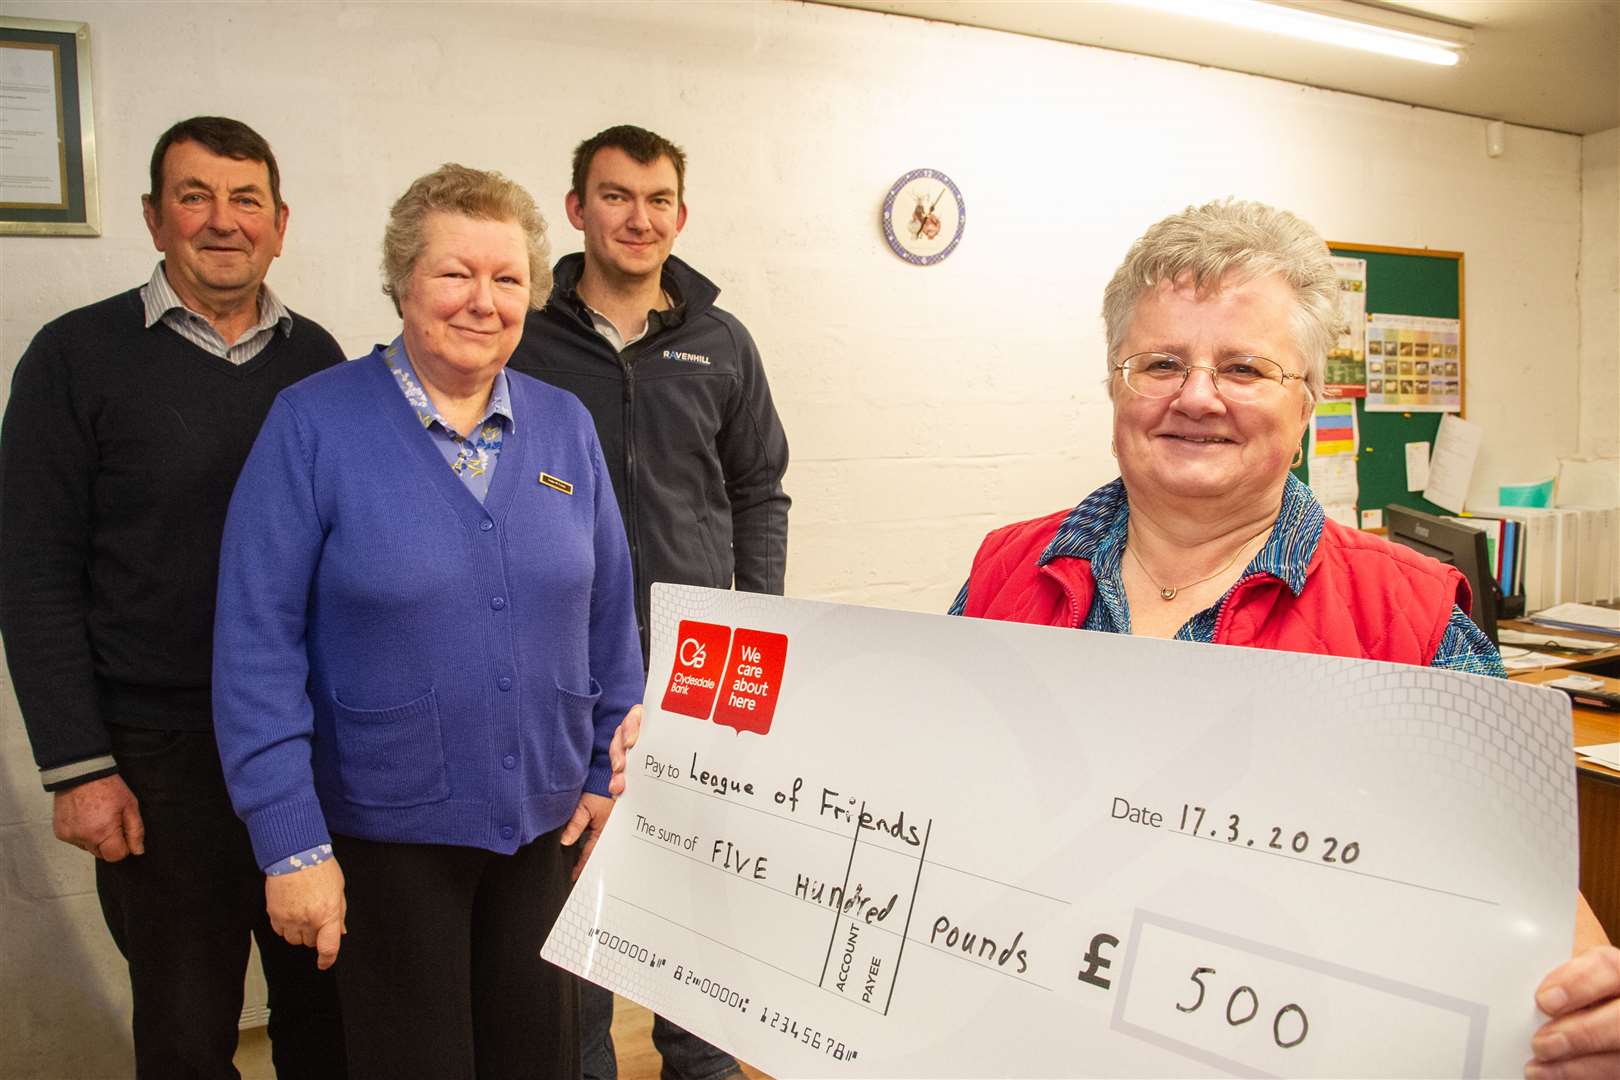 The Keith Show presents a cheque for £500 to the League of Friends after a successful tractor run last May. LtR: Ewan Stewart (Keith Show vice chairman), Margaret Lloyd (League of Friends chairwoman), Aidan Stewart (Keith Show vintage convener) and Margaret Allan (League of Friends commitee member). Picture: Daniel Forsyth